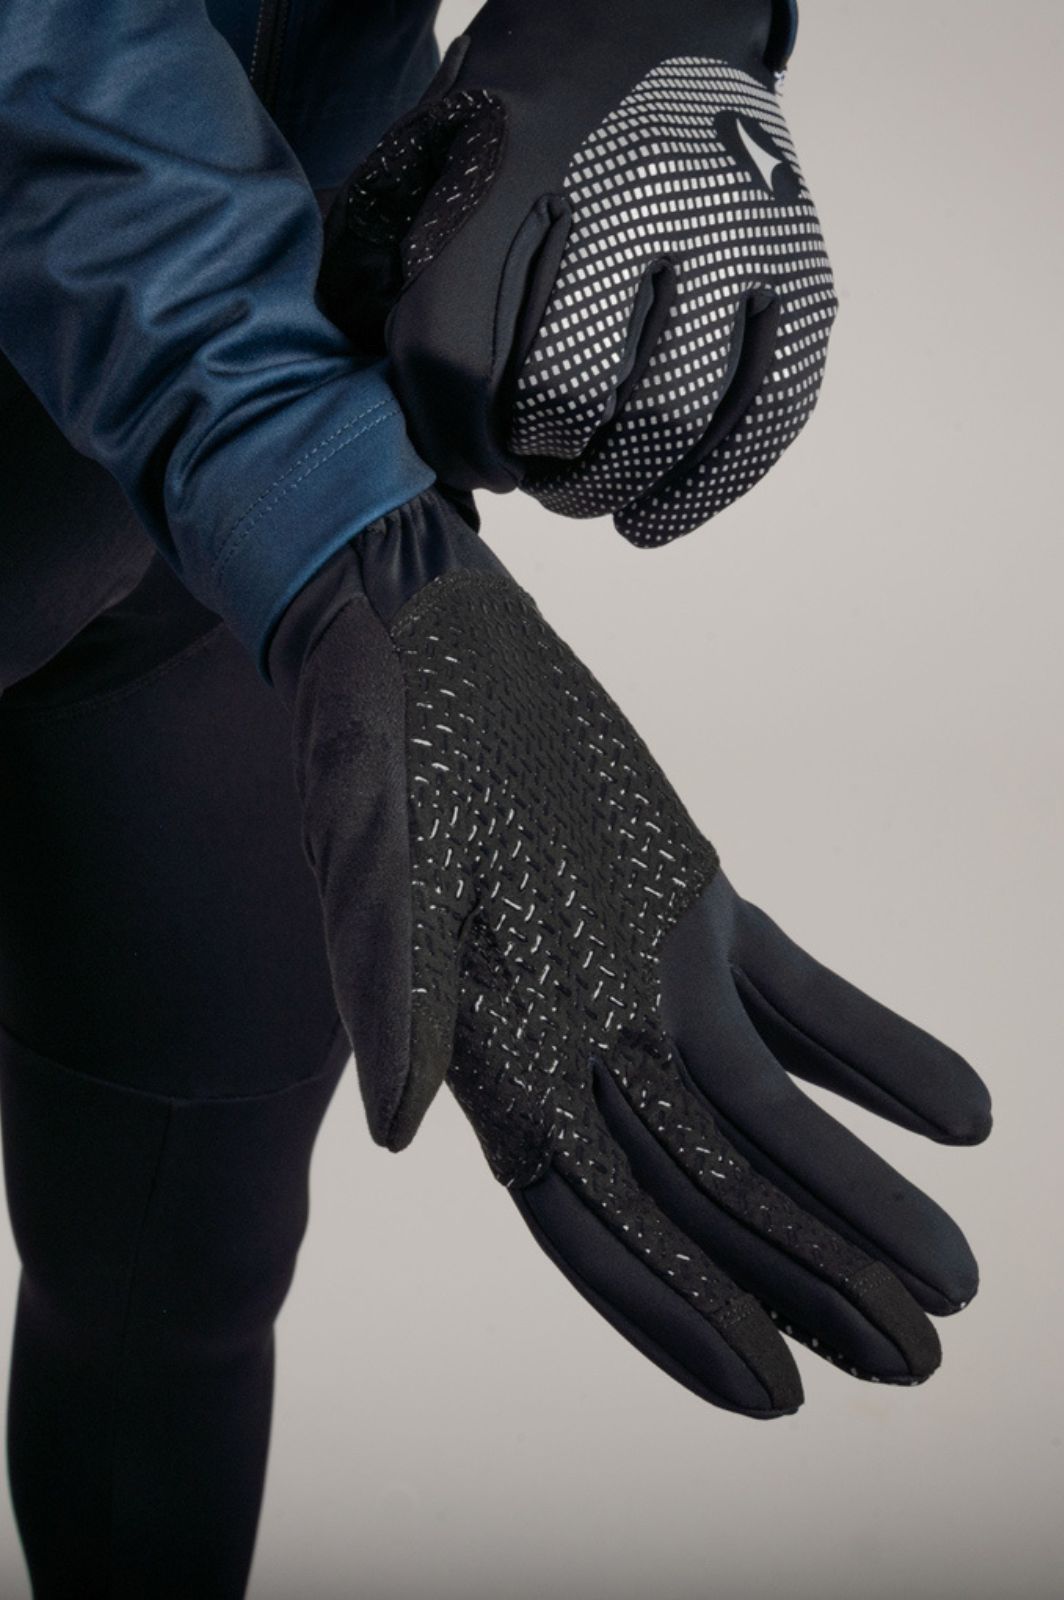 Winter Cycling Gloves - Alpine Palm Grippers